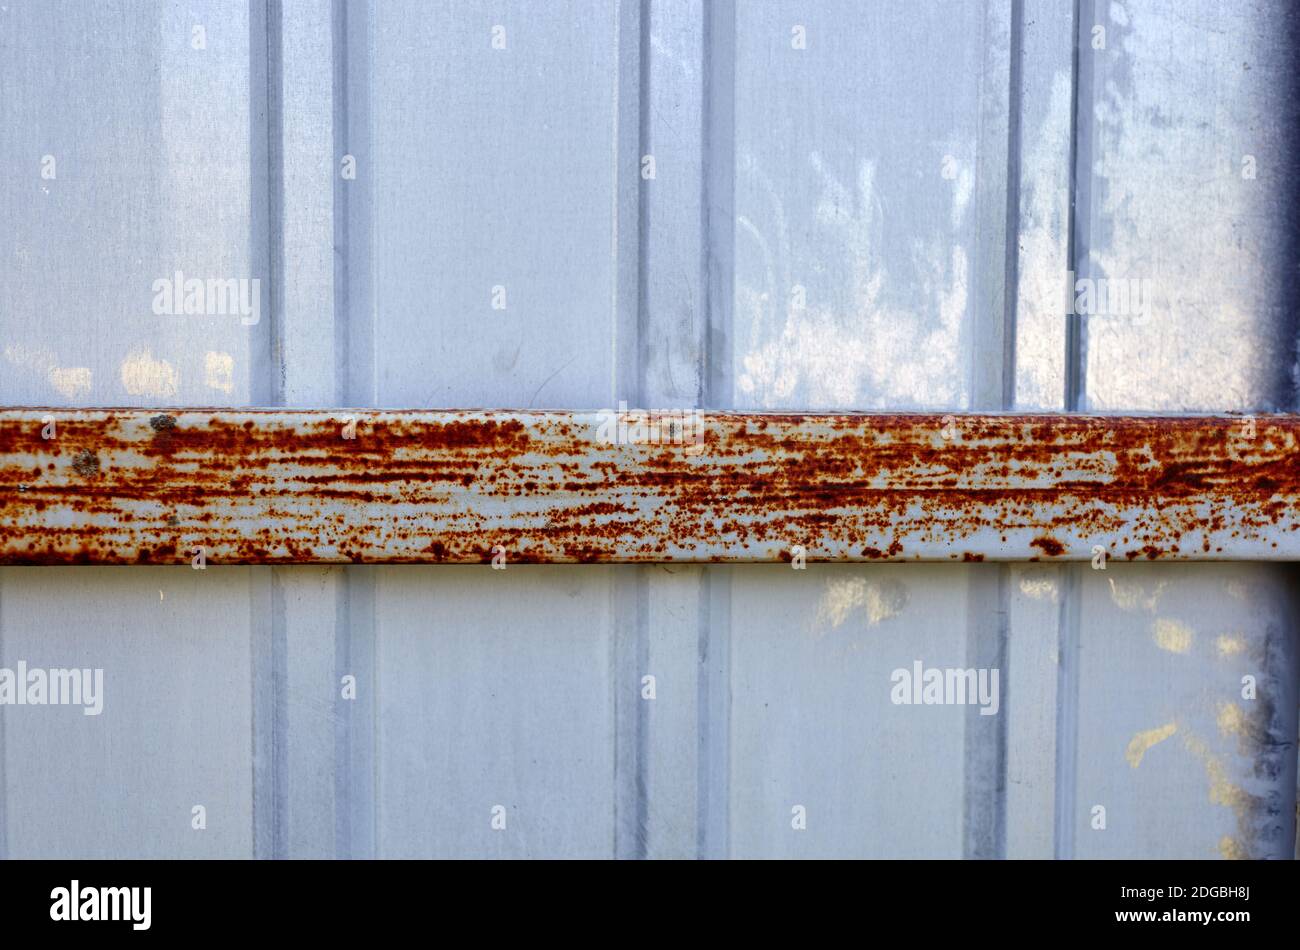 Iron rusty fence. White corrugated metal or zinc texture surface or galvanize steel in the vertical line background Stock Photo